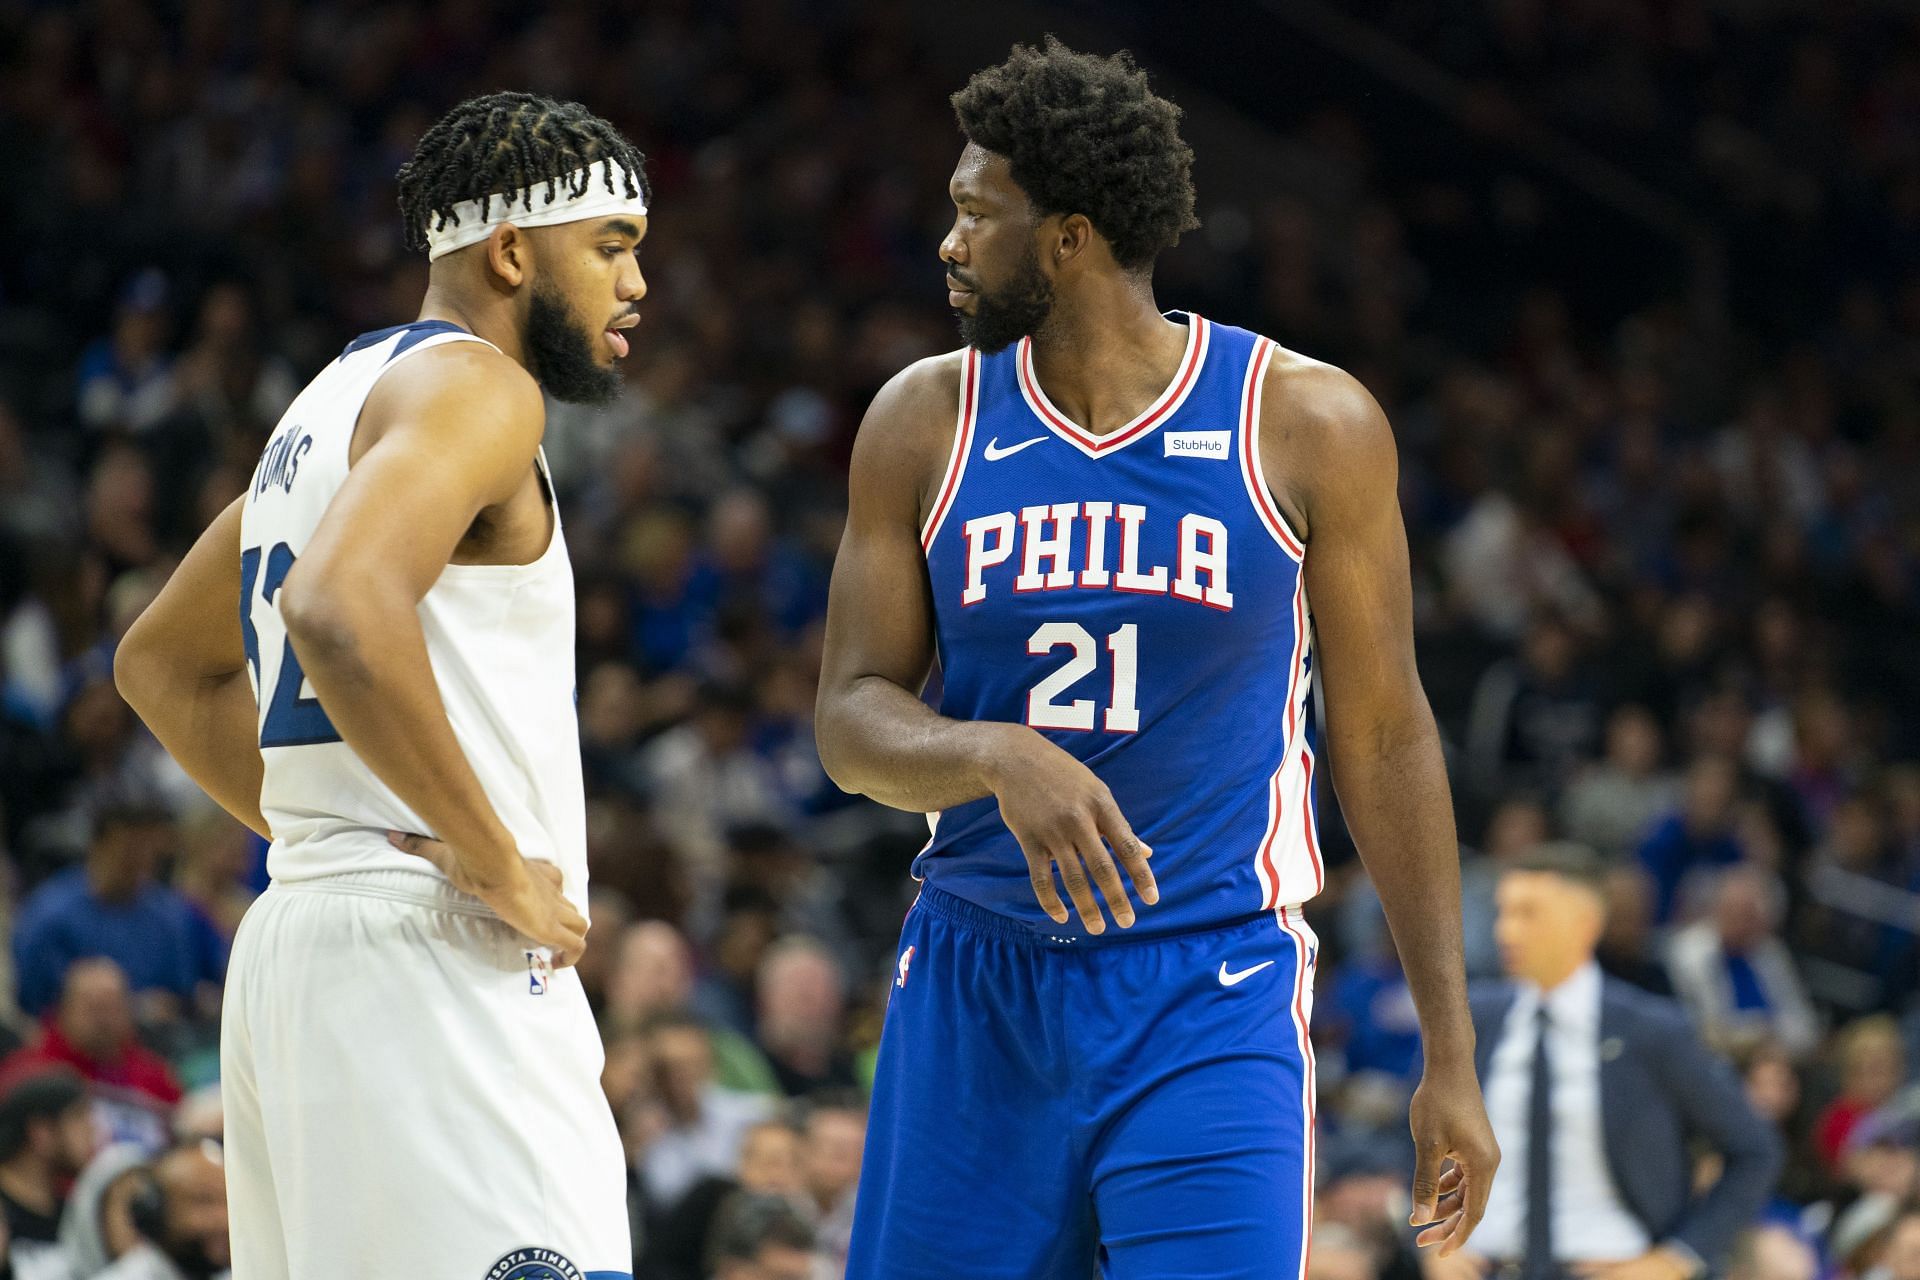 Karl-Anthony Towns and Joel Embiid walk past each other during an NBA game between the Philadelphia 76ers and the Minnesota Timberwolves.